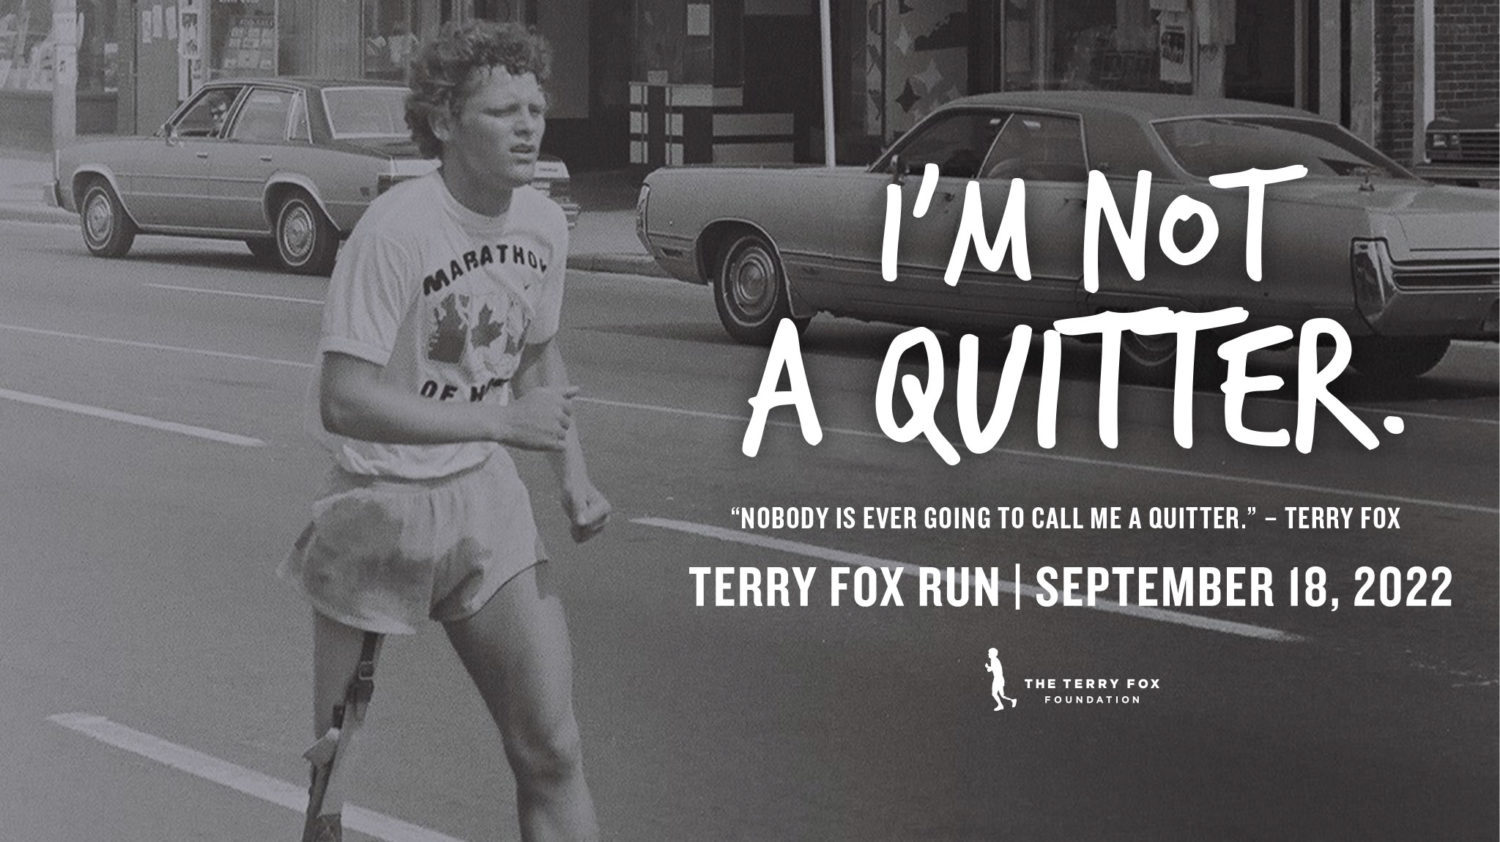 I'm Not a Quitter. "nobody is ever going to call me a quitter." - Quote from Terry Fox. Terry Fox Run on September 18, 2022